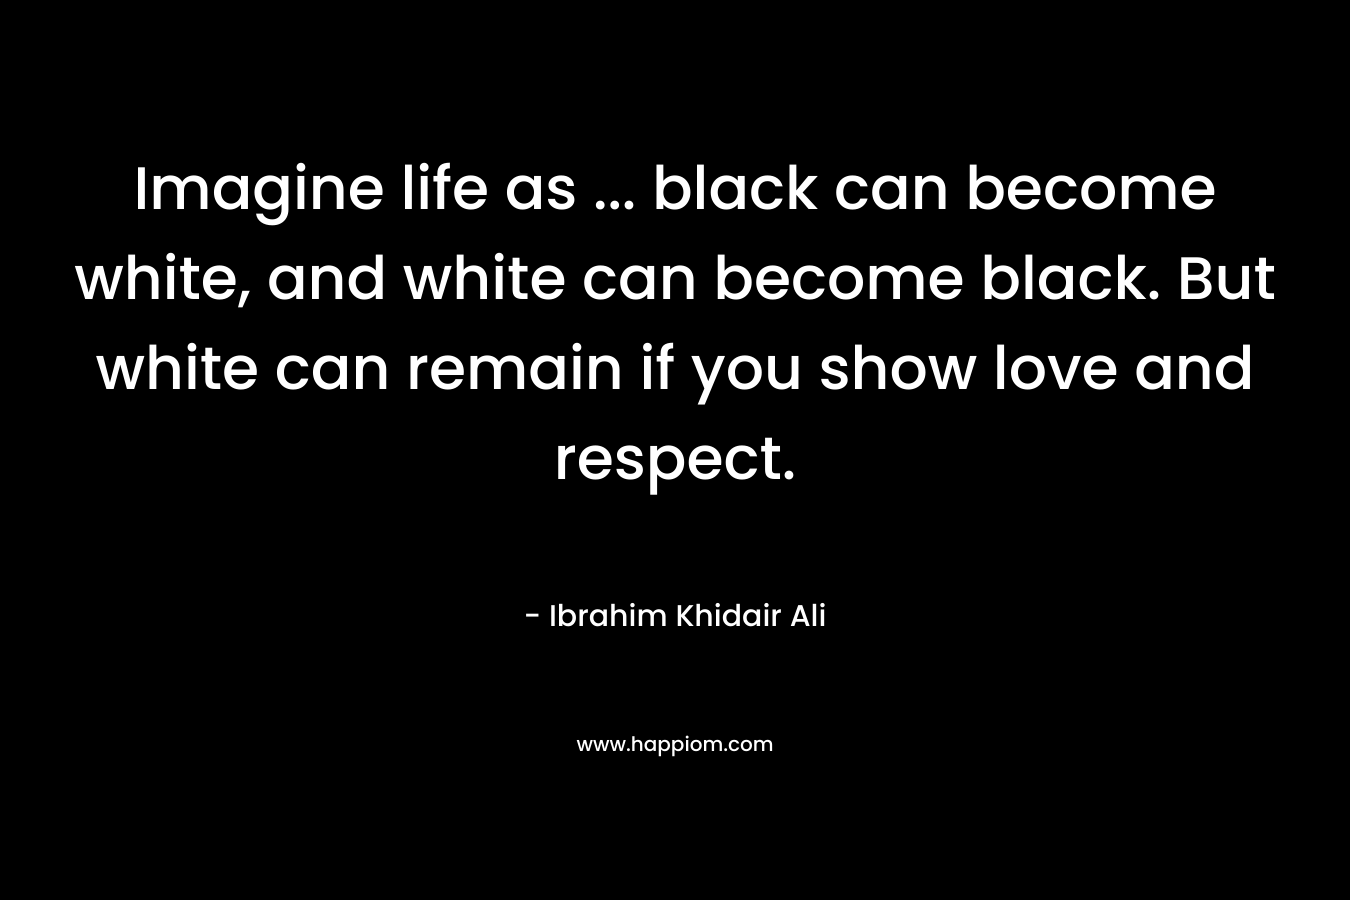 Imagine life as ... black can become white, and white can become black. But white can remain if you show love and respect.